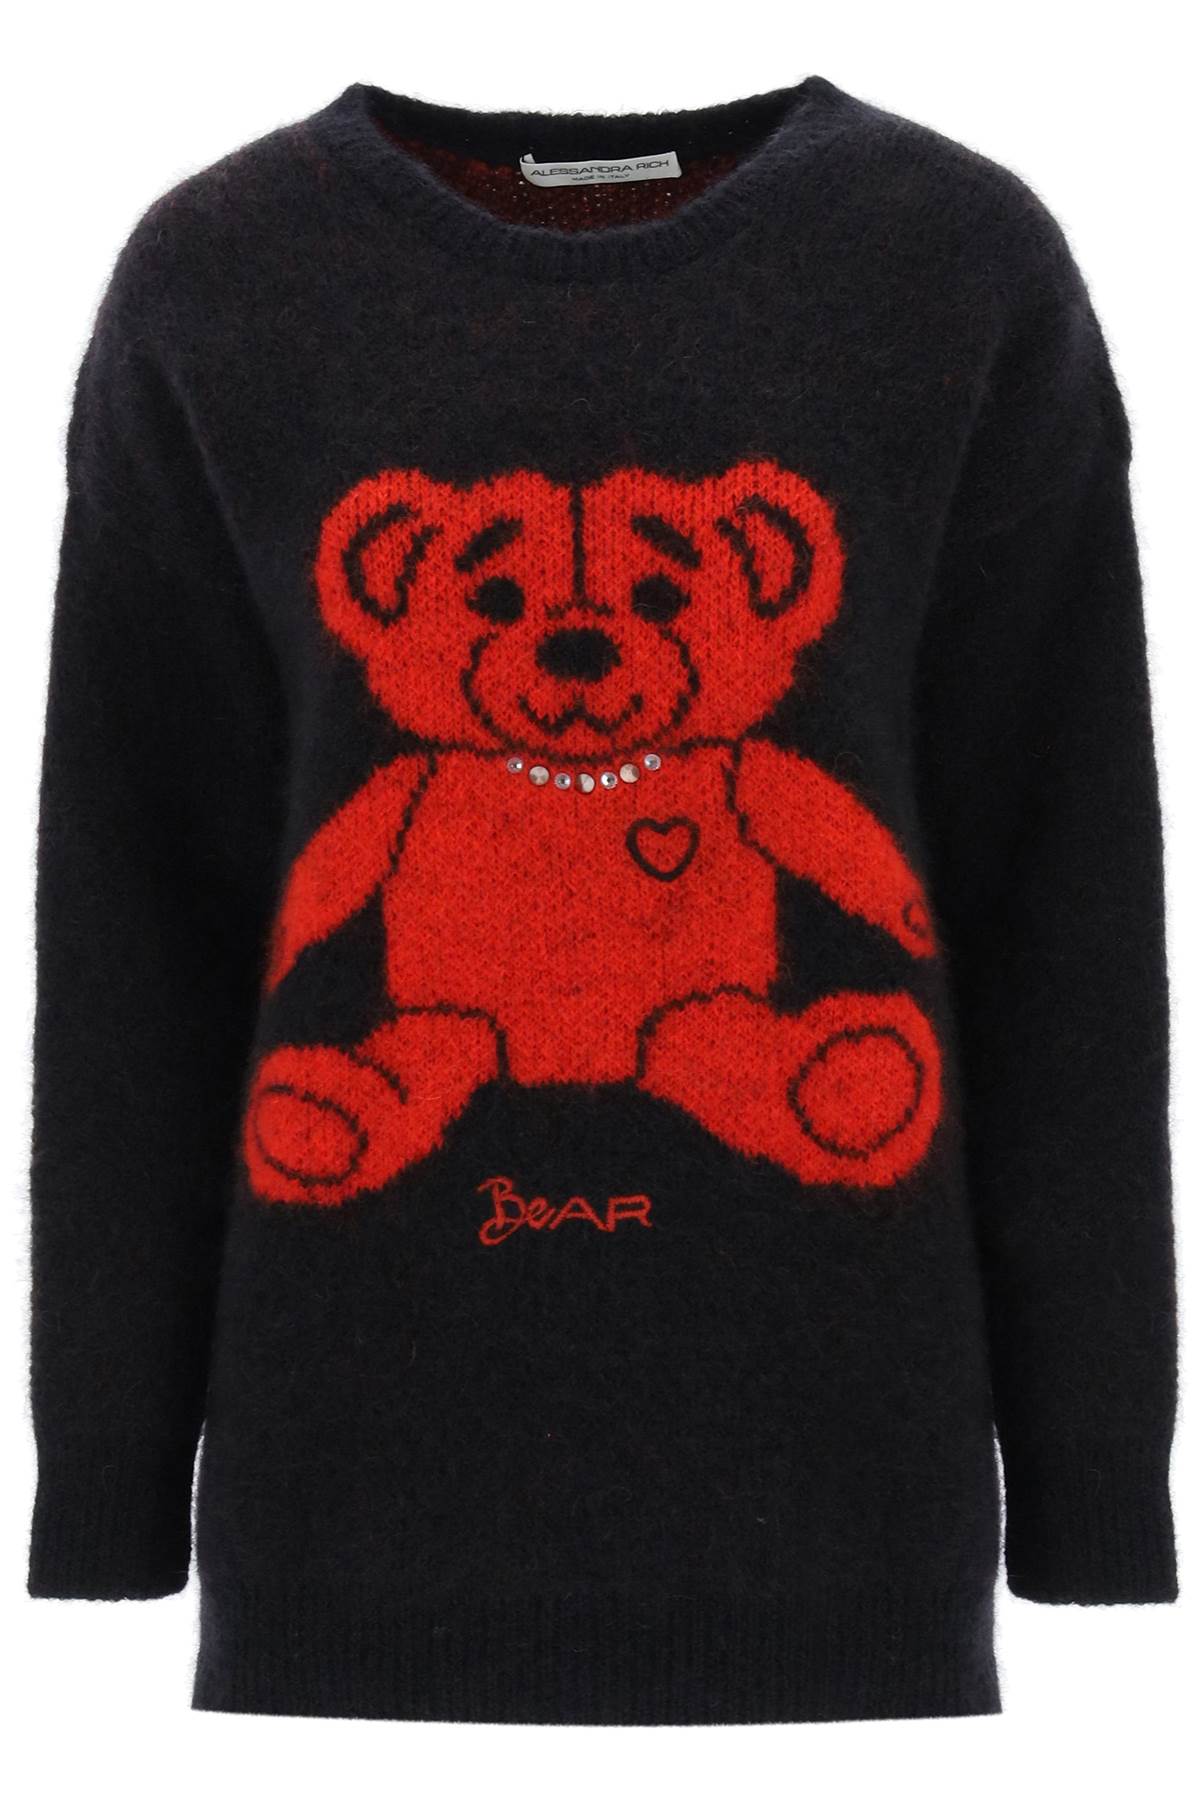 ALESSANDRA RICH SWEATER IN JACQUARD KNIT WITH BEAR MOTIF AND APPLIQUES